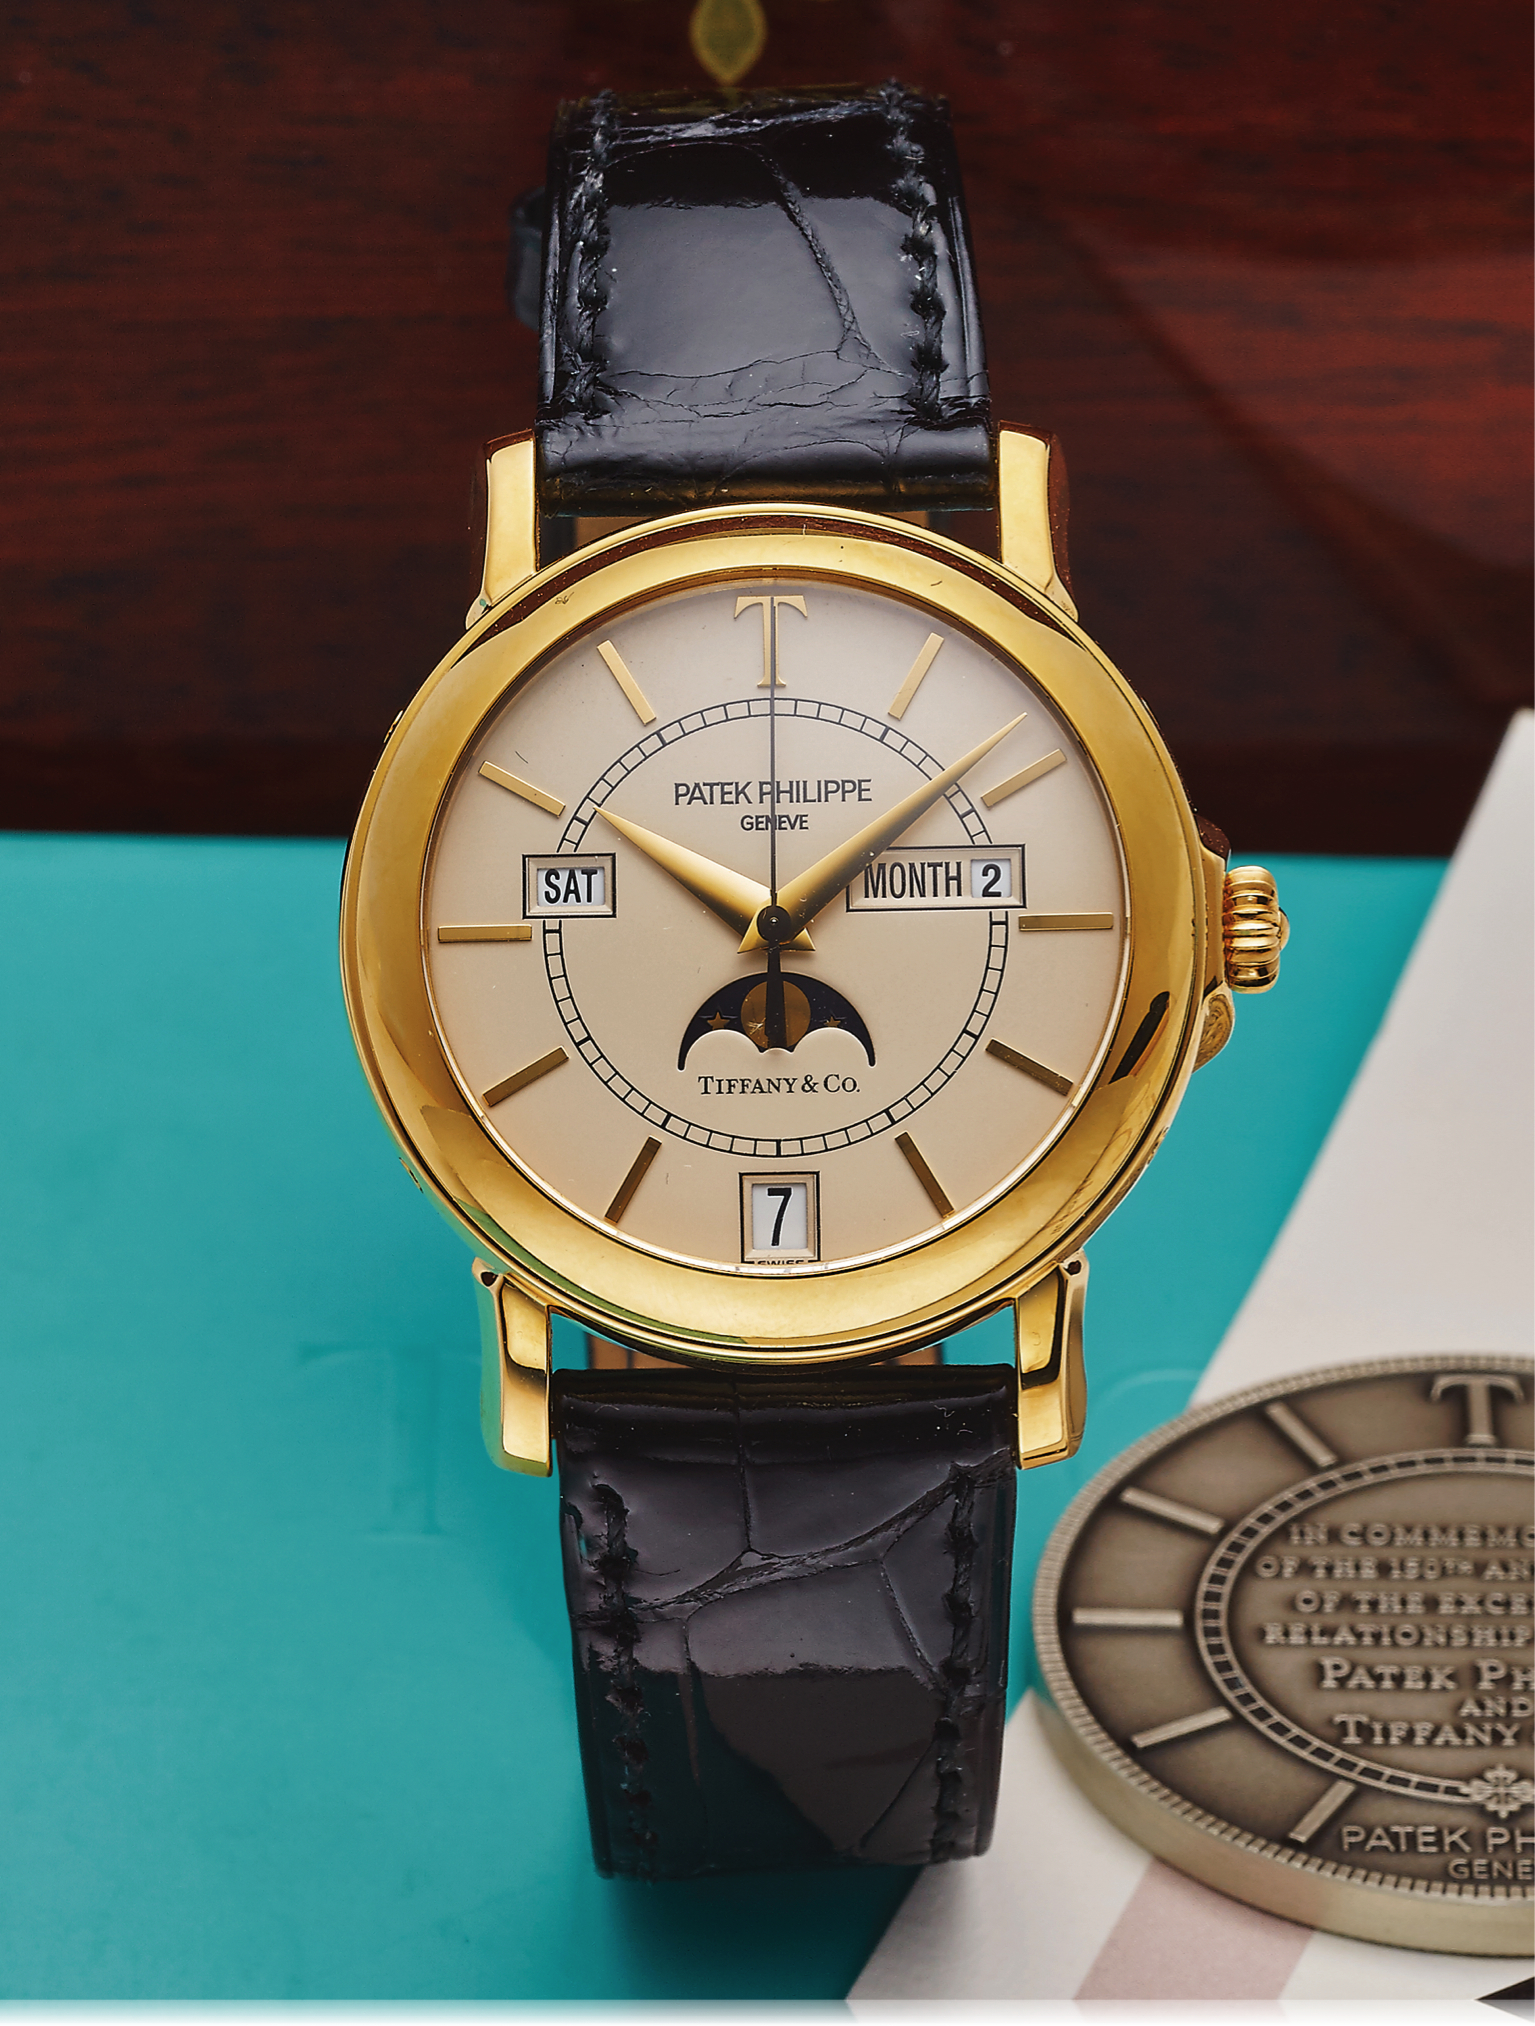 PATEK PHILIPPE, YELLOW GOLD, LIMITED EDITION OF 150 PIECES, REF. 5150J  RETAILED BY TIFFANY & CO.